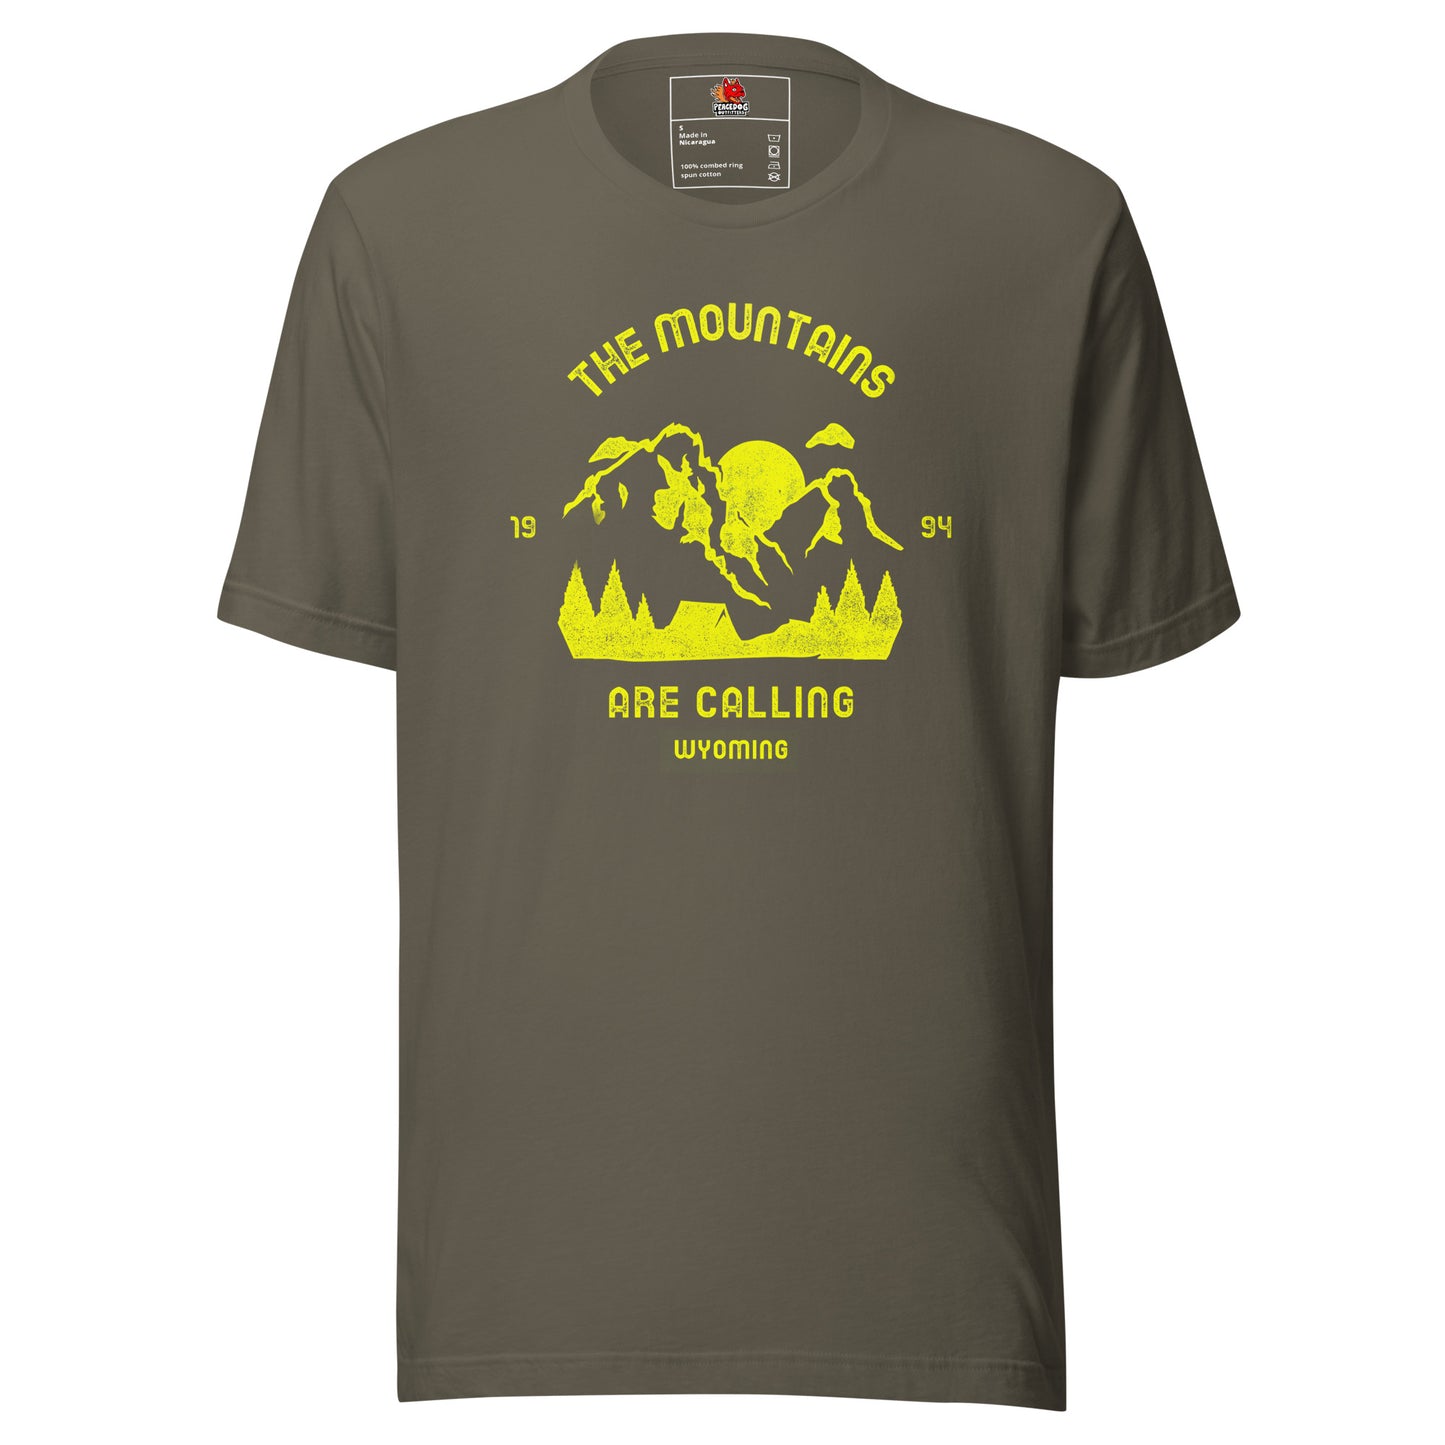 The Mountains are Calling - WYOMING T-shirt